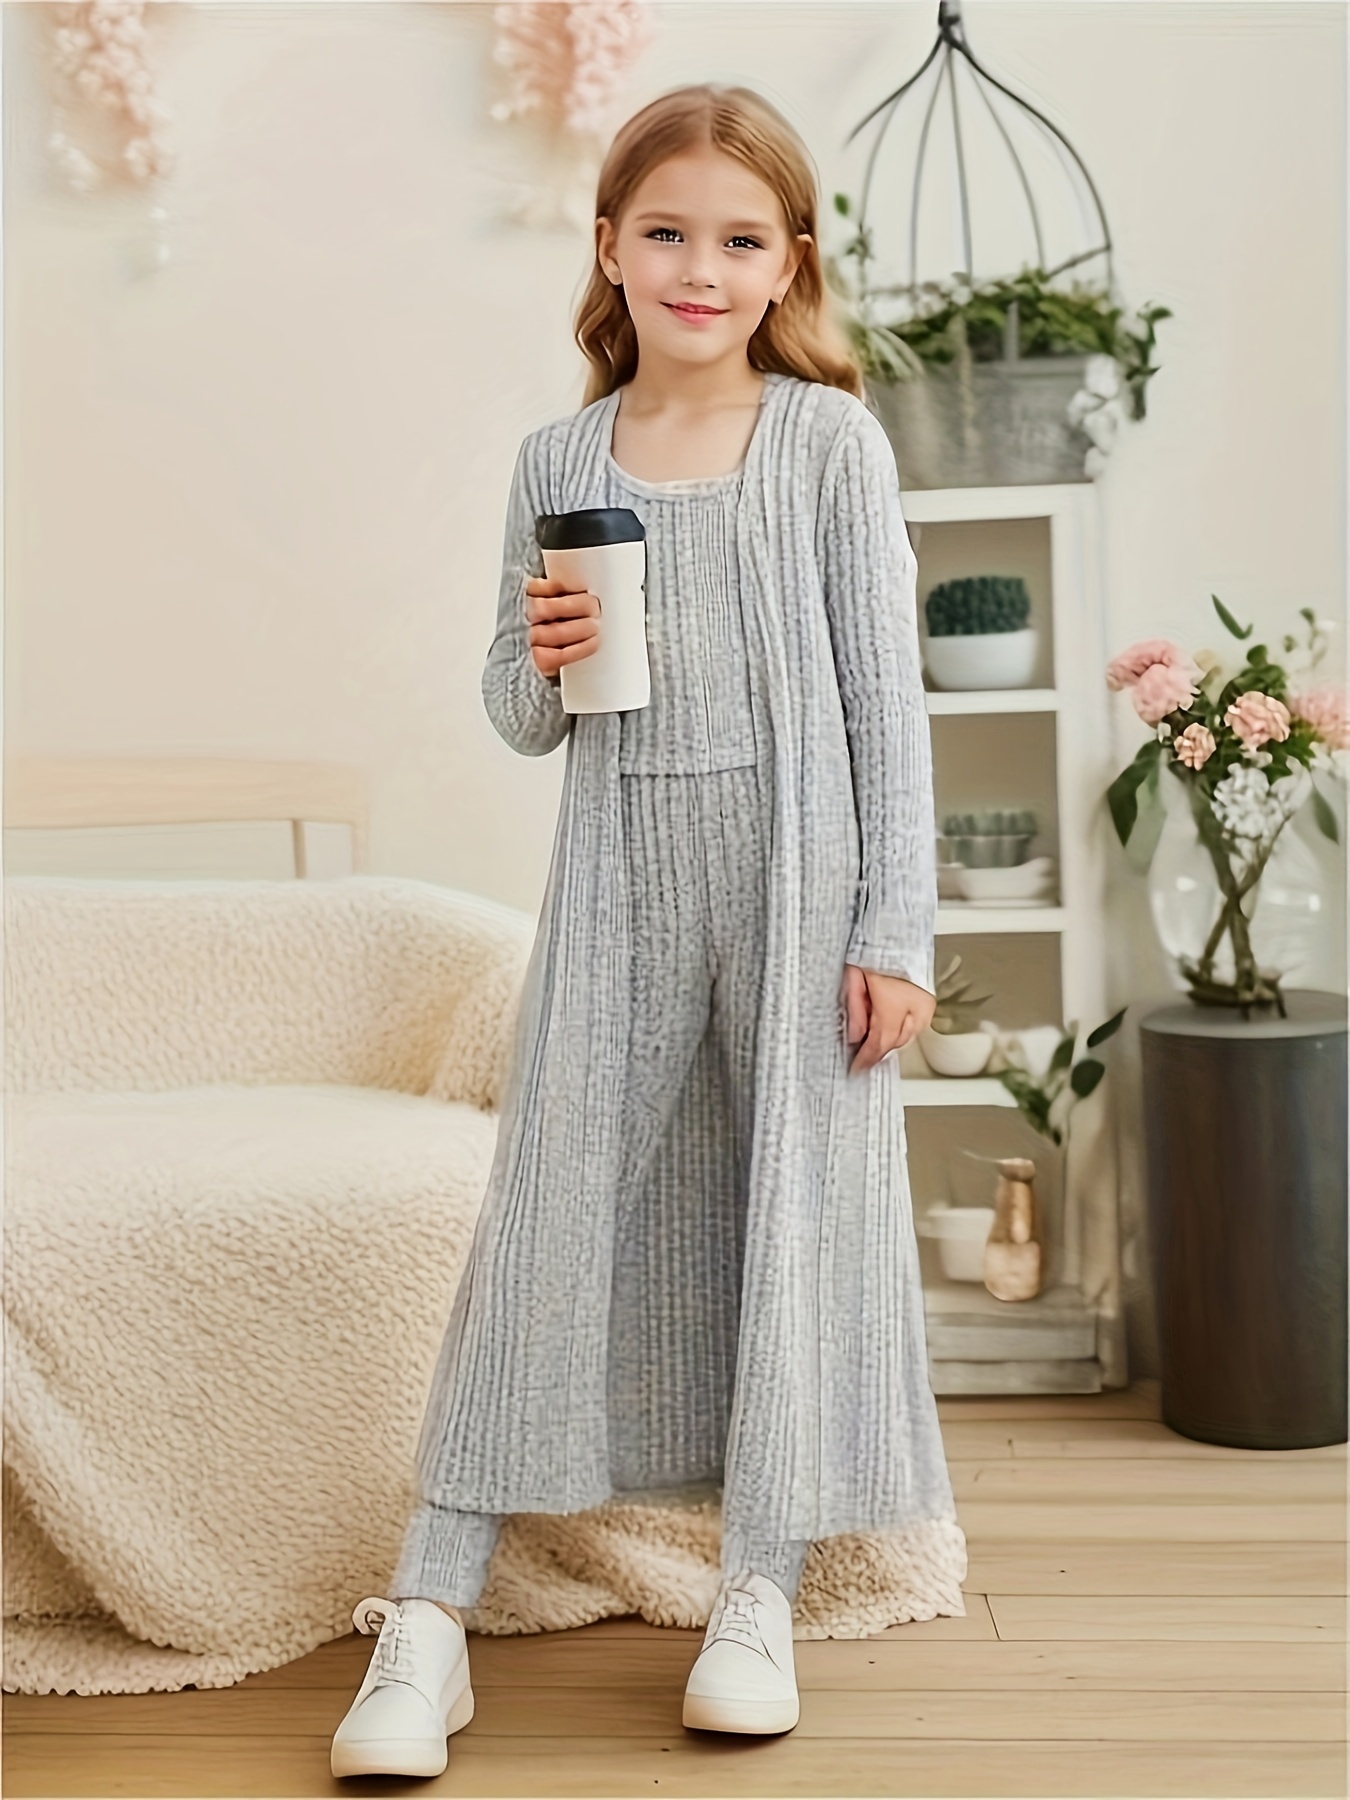 Kid Girls Fashionable Outfits Round Neckline Top+Loose Long Pants Casual  Clothes